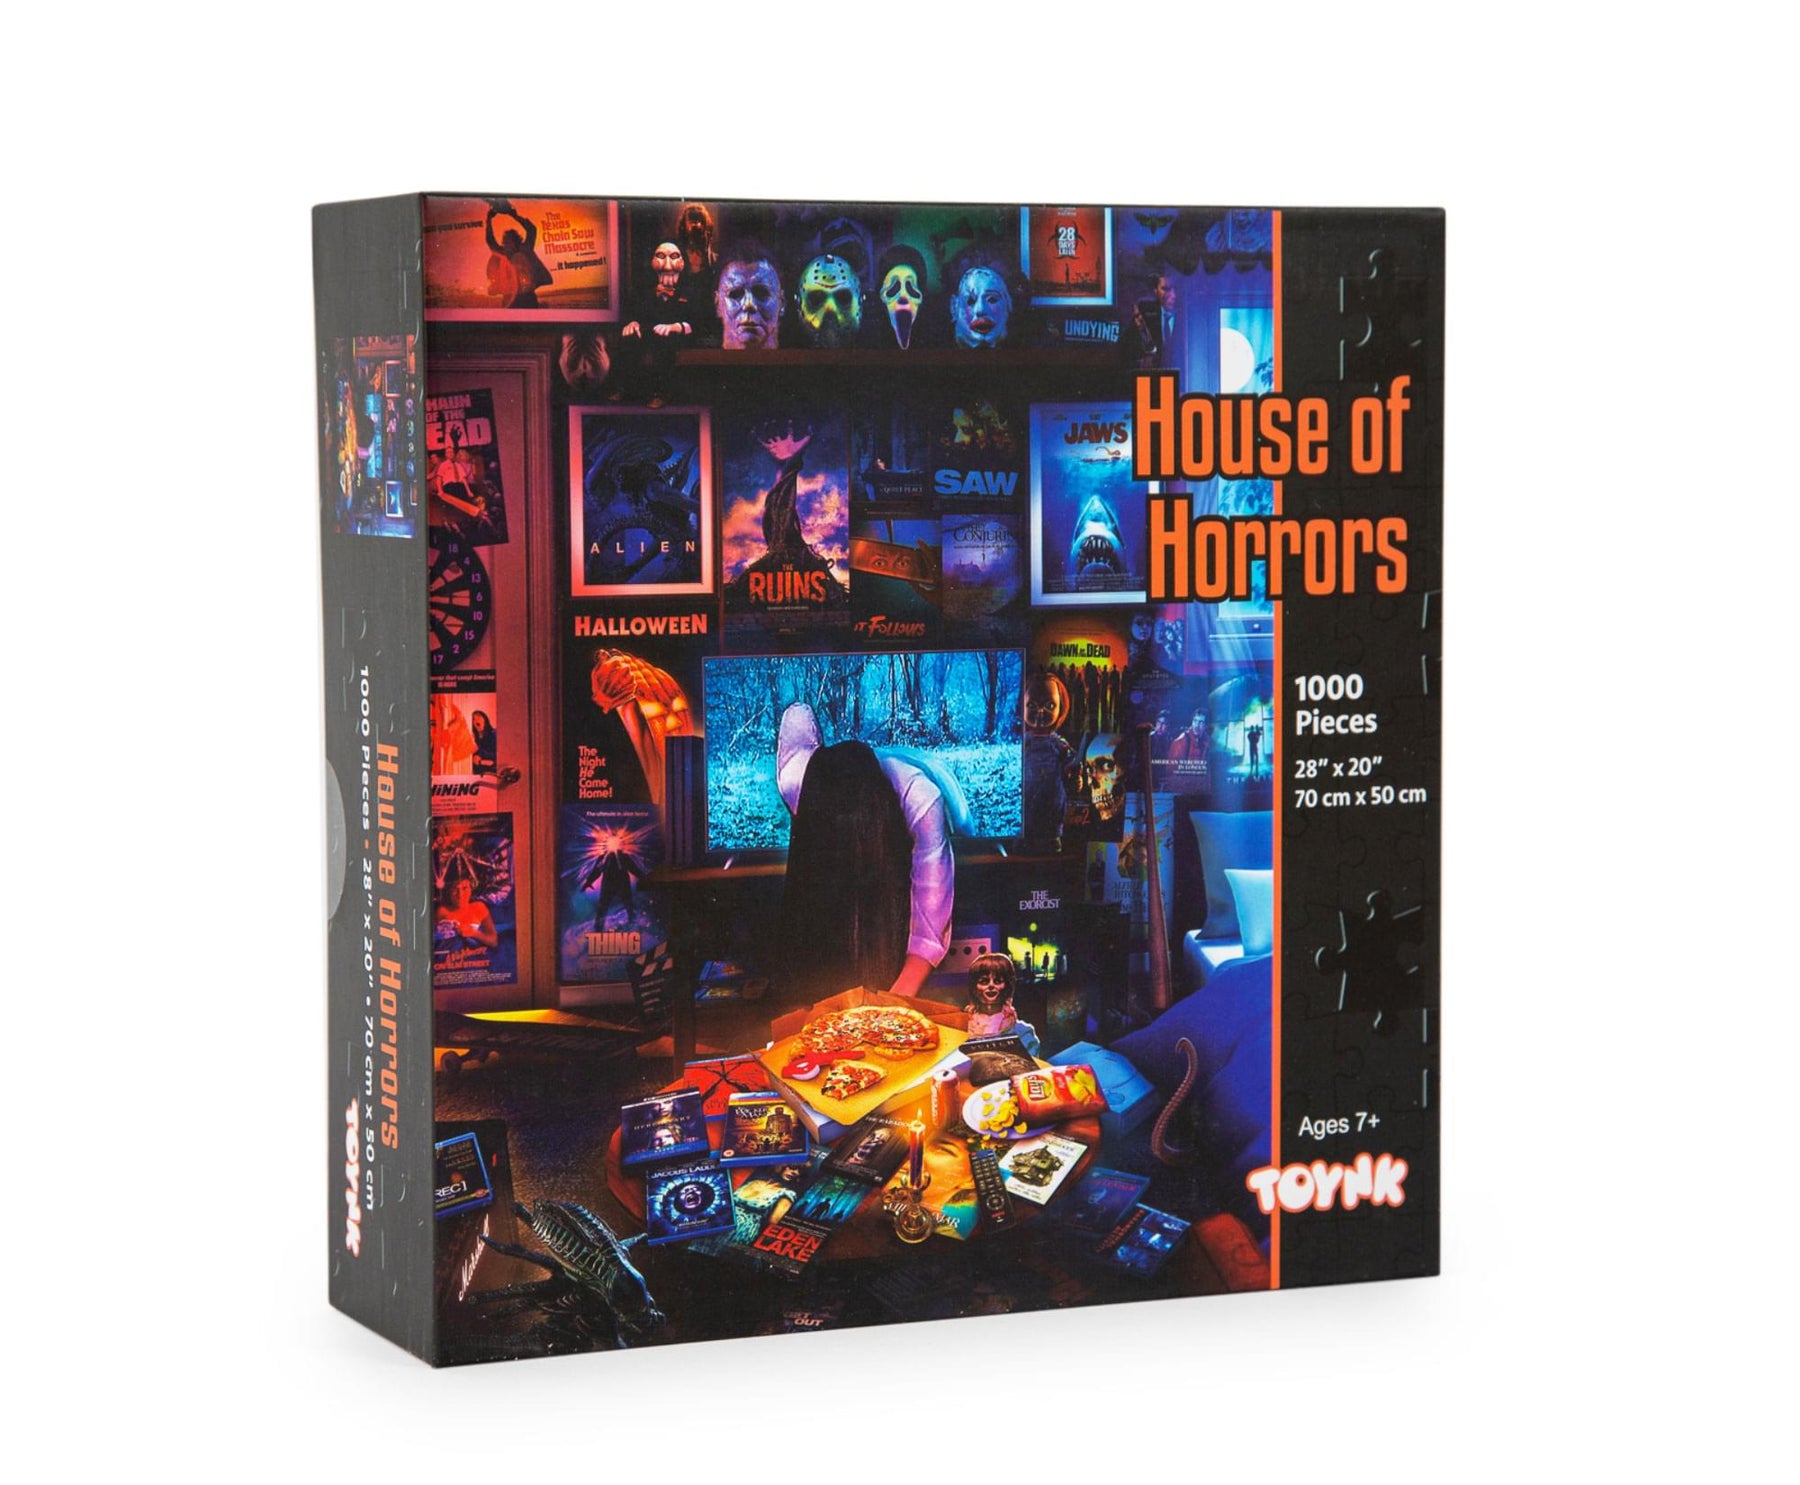 House of Horrors and Scary Movies 1000 Piece Jigsaw Puzzle By Rachid Lotf